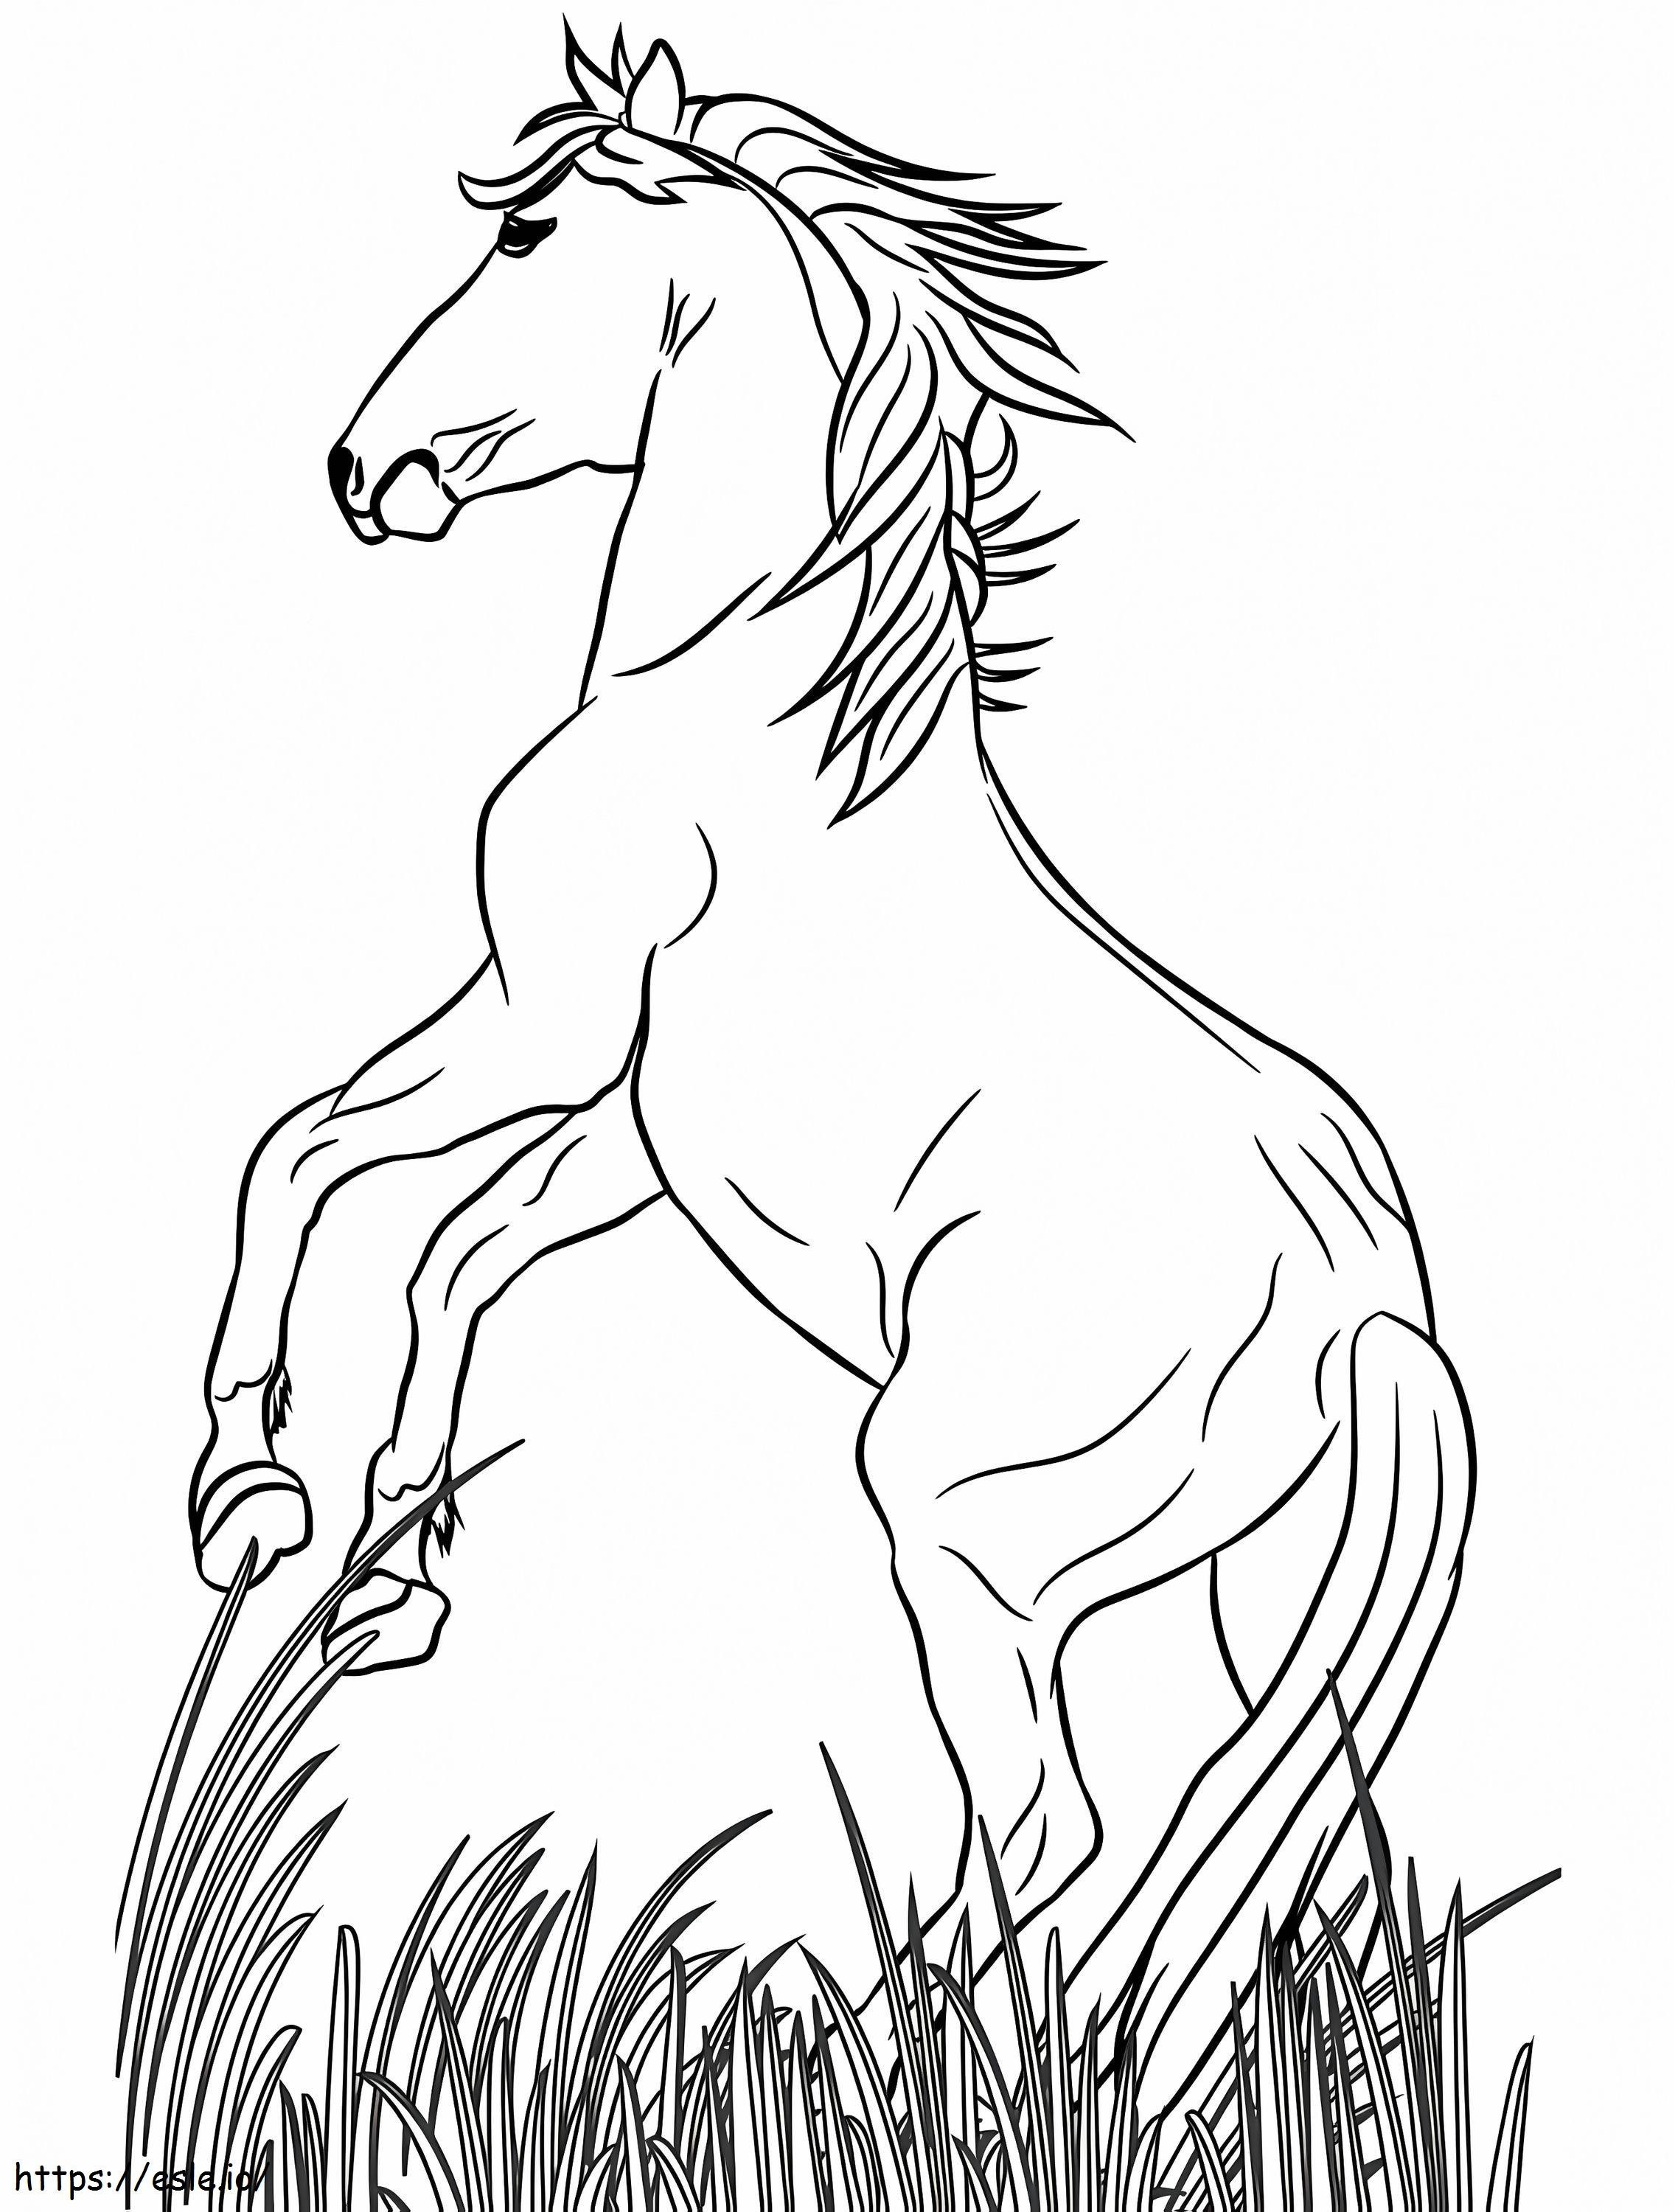 Horse On Grass coloring page